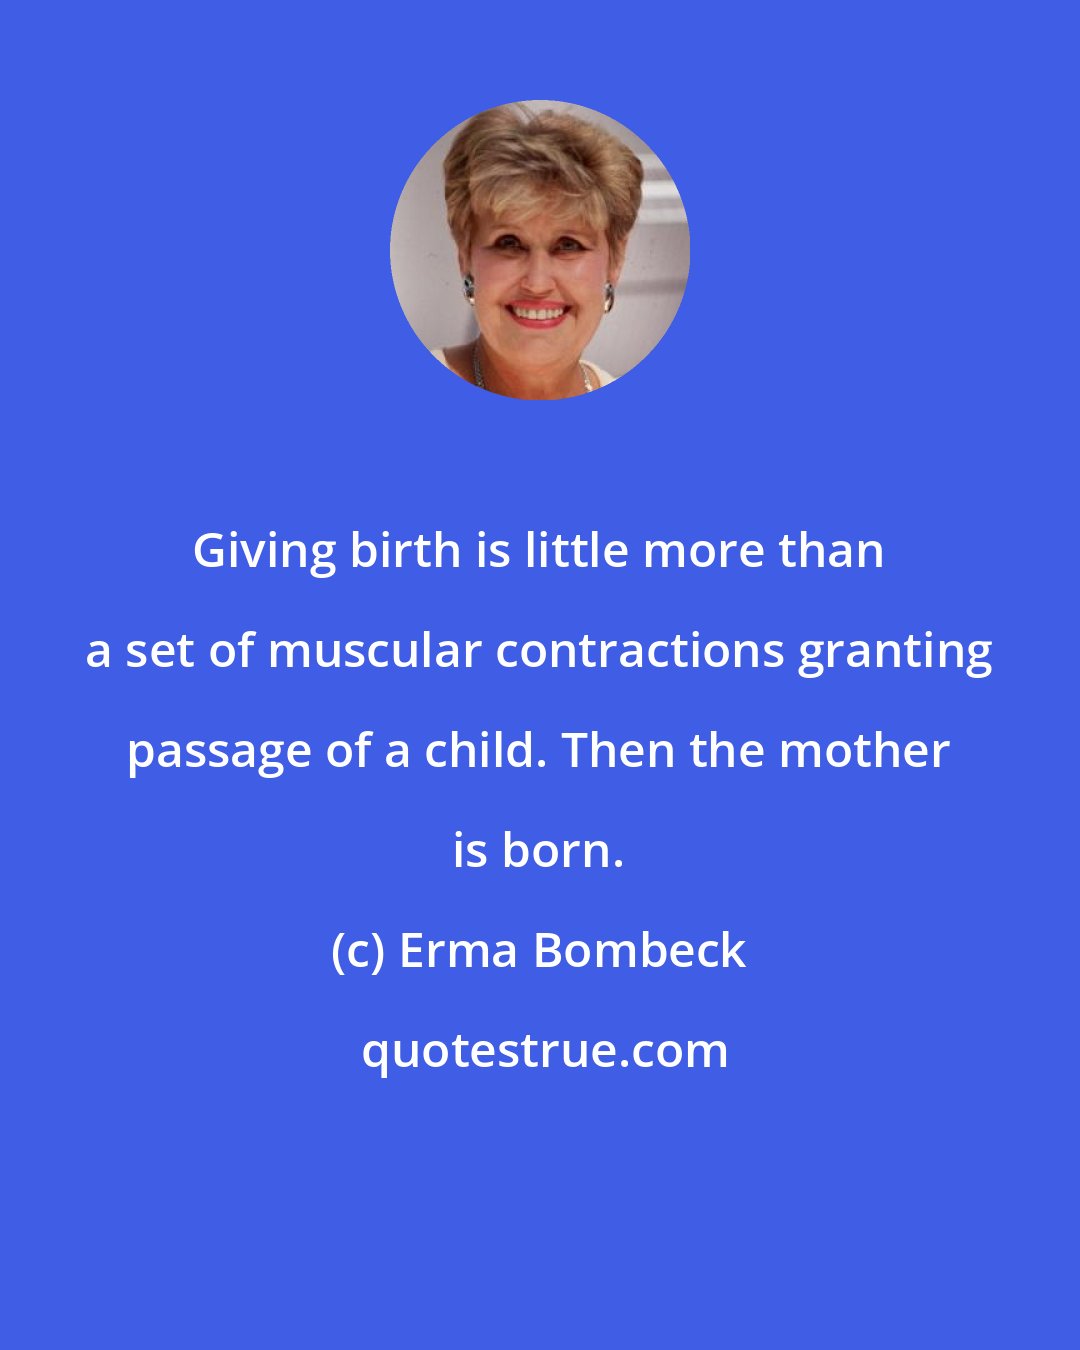 Erma Bombeck: Giving birth is little more than a set of muscular contractions granting passage of a child. Then the mother is born.